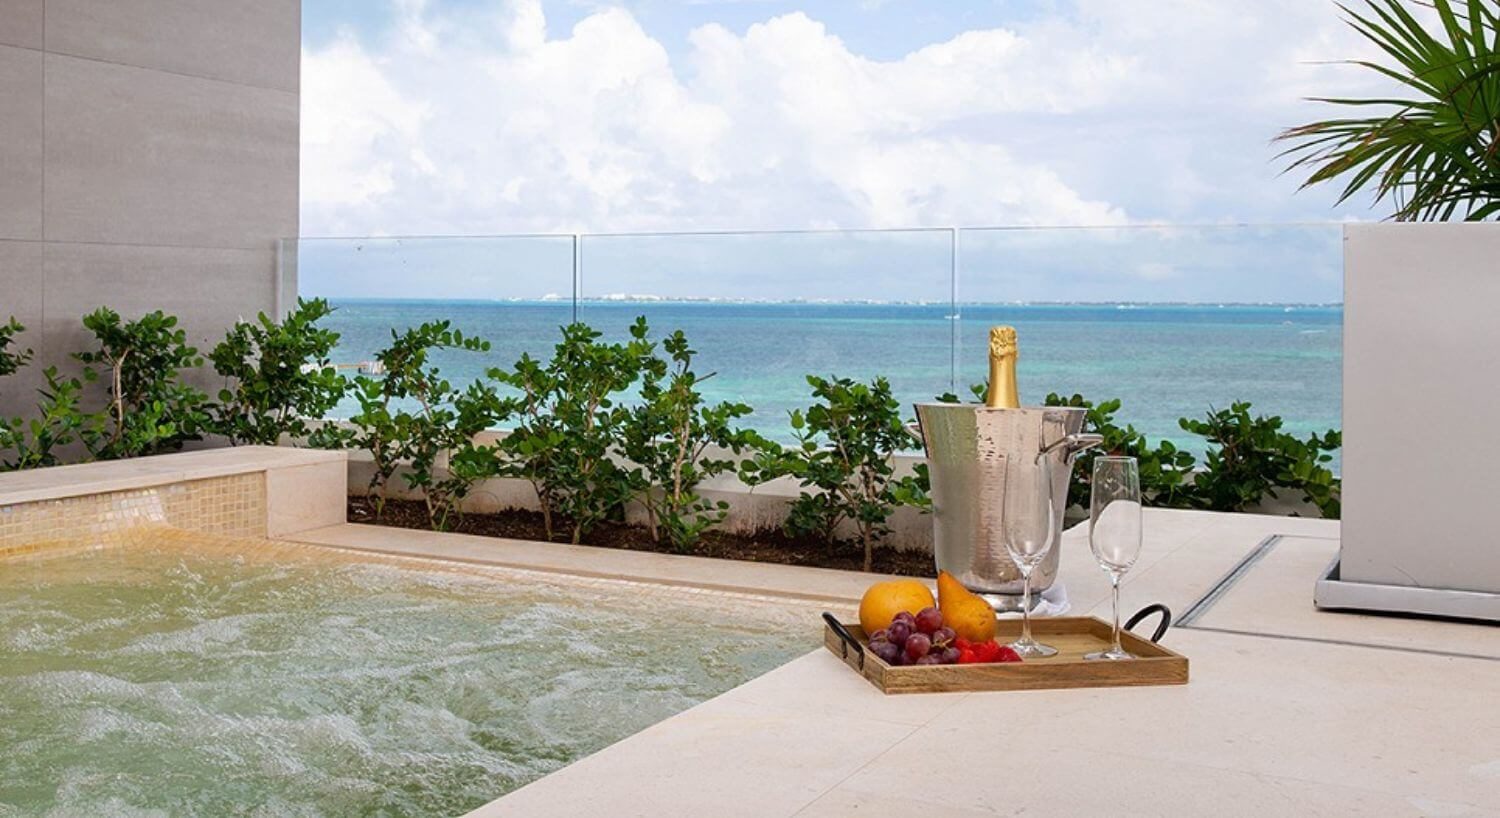 An outdoor hot tub bubbling away, with a wood platter of fruit and champagne glasses, along with a silver bucket of champagne, green bushes behind the hot tub, and turquoise ocean views.